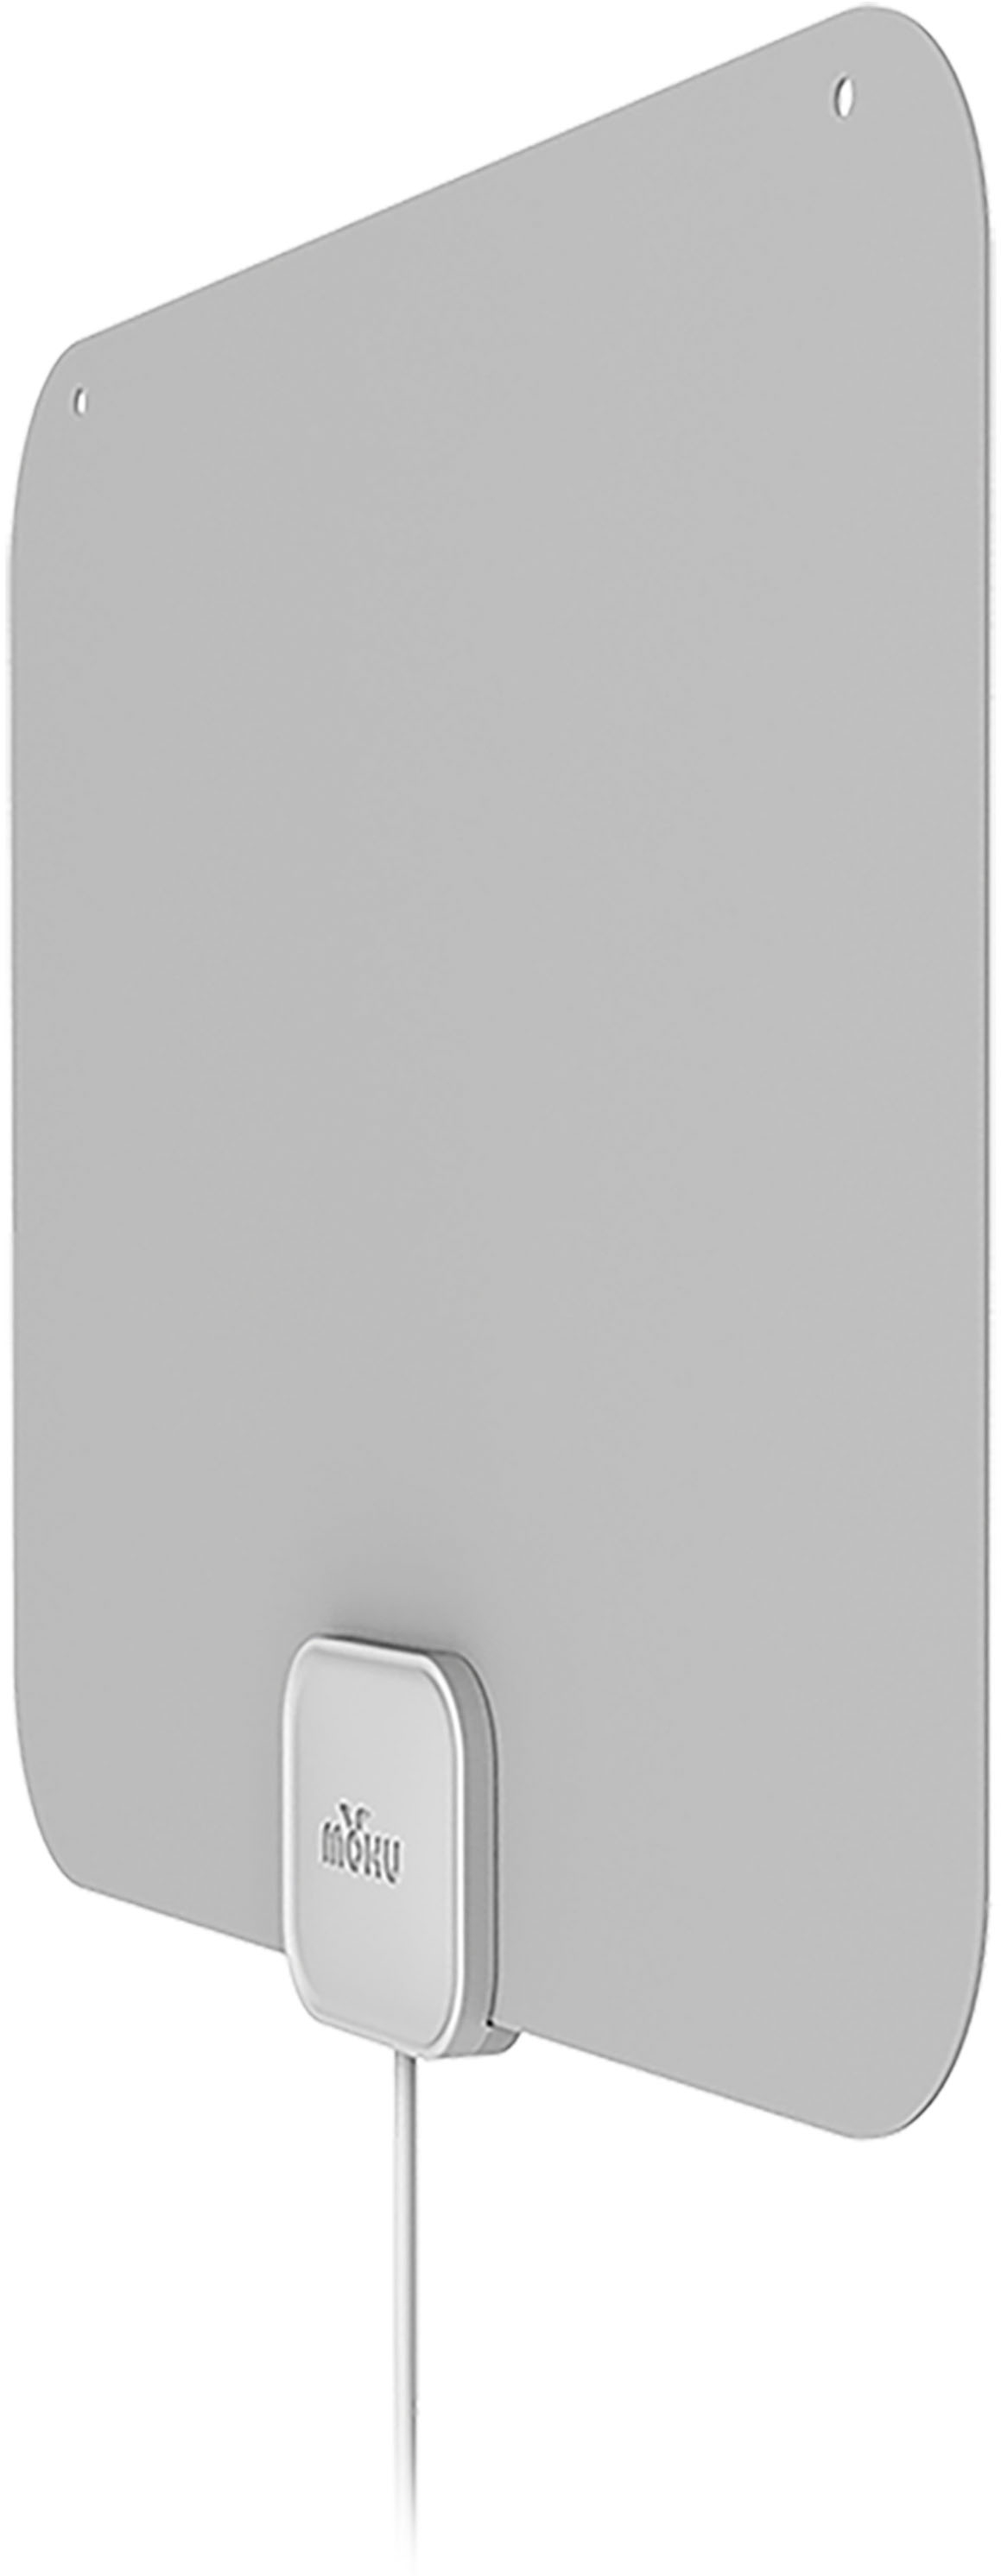 Angle View: Mohu - Leaf Amplified Indoor HDTV Antenna, 60-mile Range - Gray